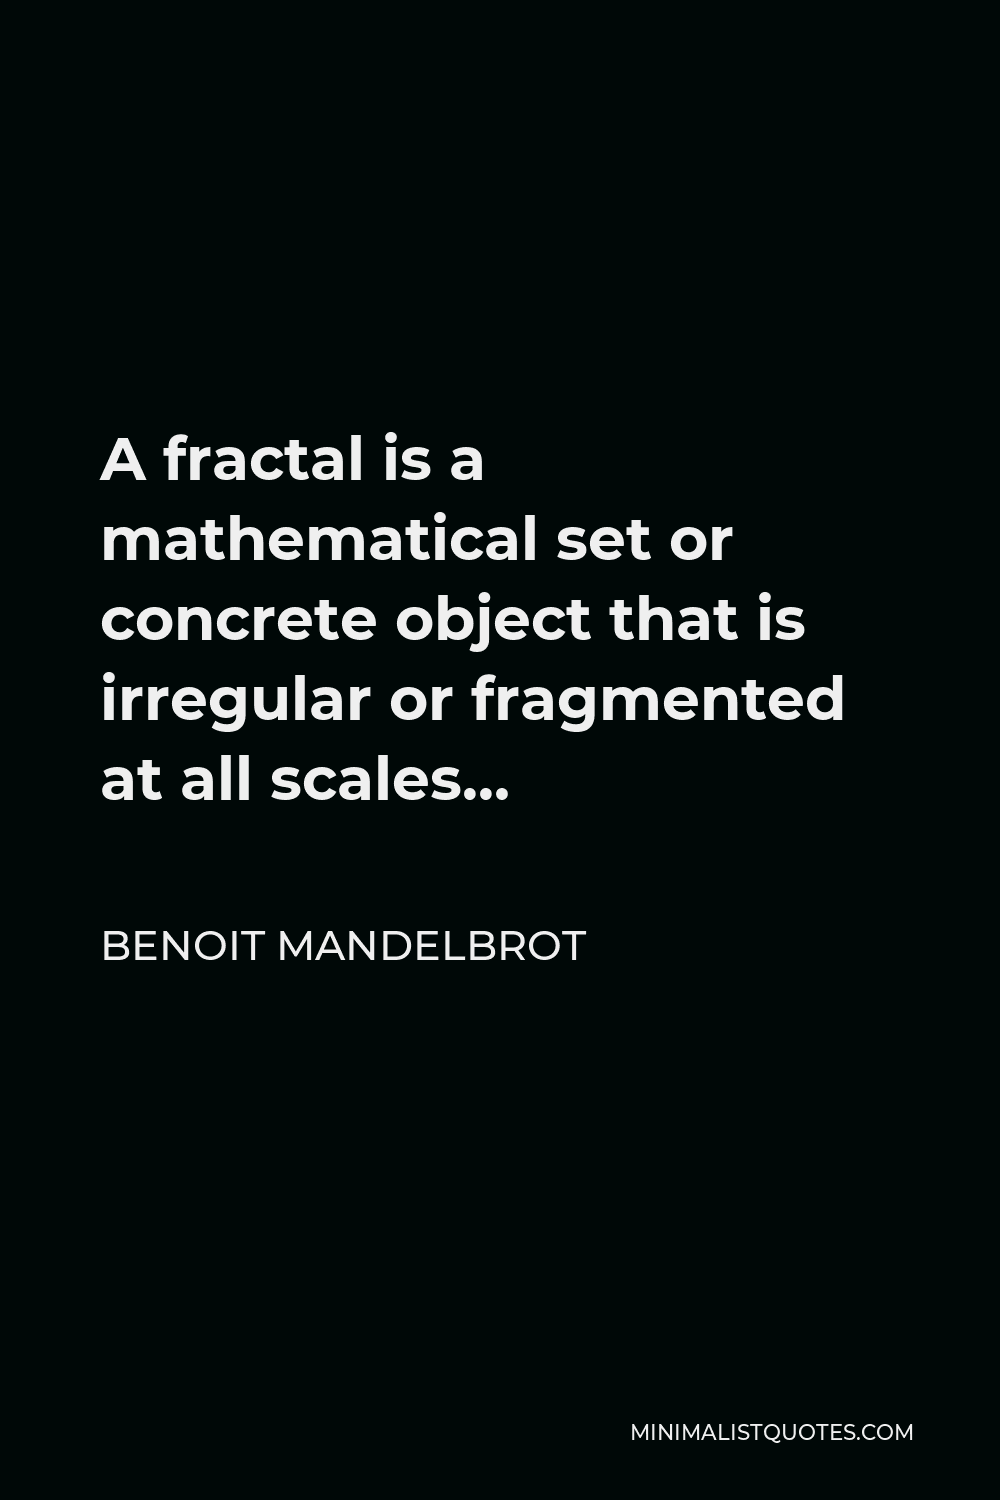 Benoit Mandelbrot Quote - A fractal is a mathematical set or concrete object that is irregular or fragmented at all scales…